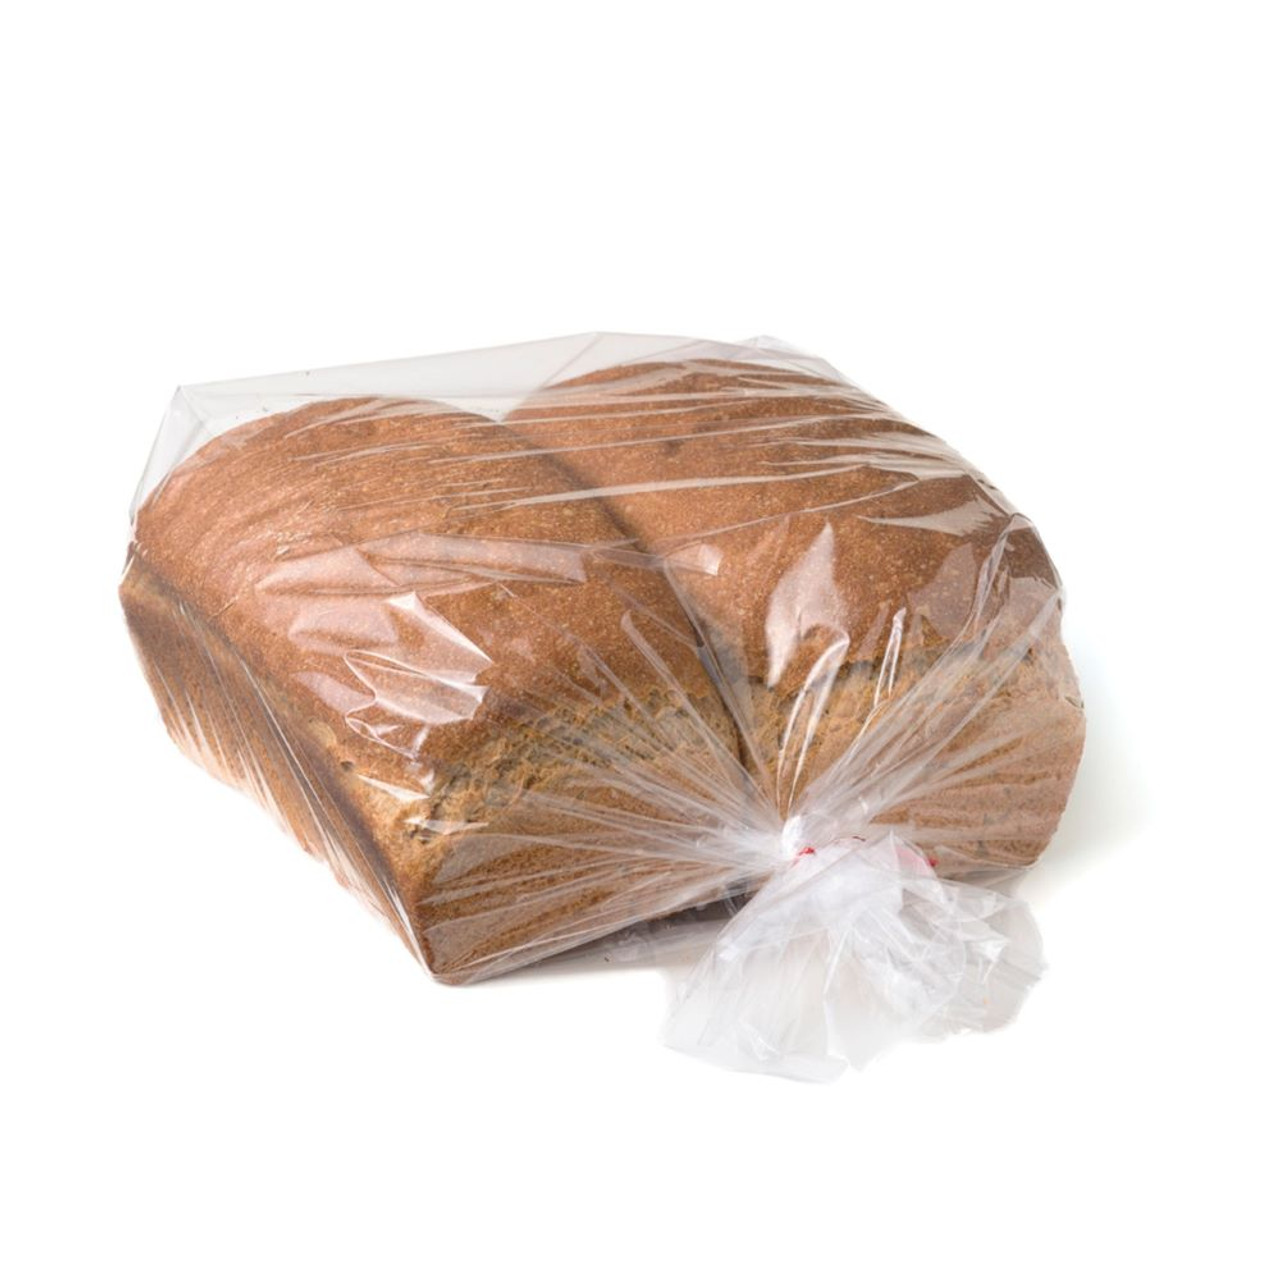 Dining Collection Storage Bags w/ Twist Ties - 100 ct.